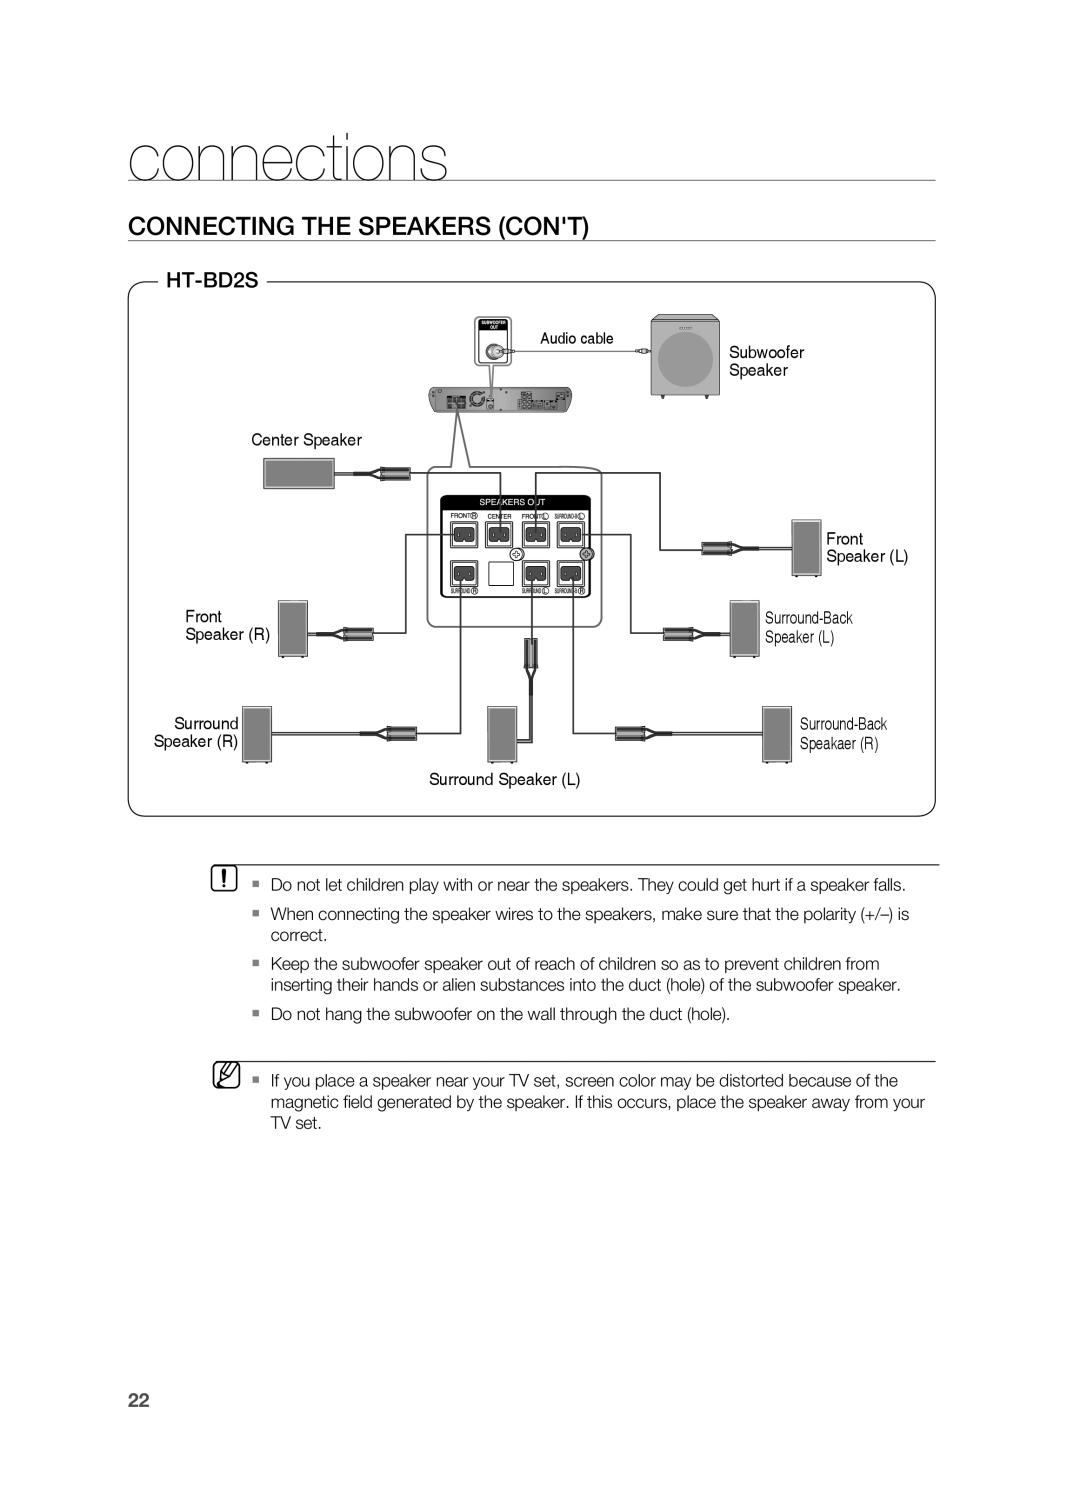 Samsung HT-BD2S manual Connecting the Speakers cont, connections 